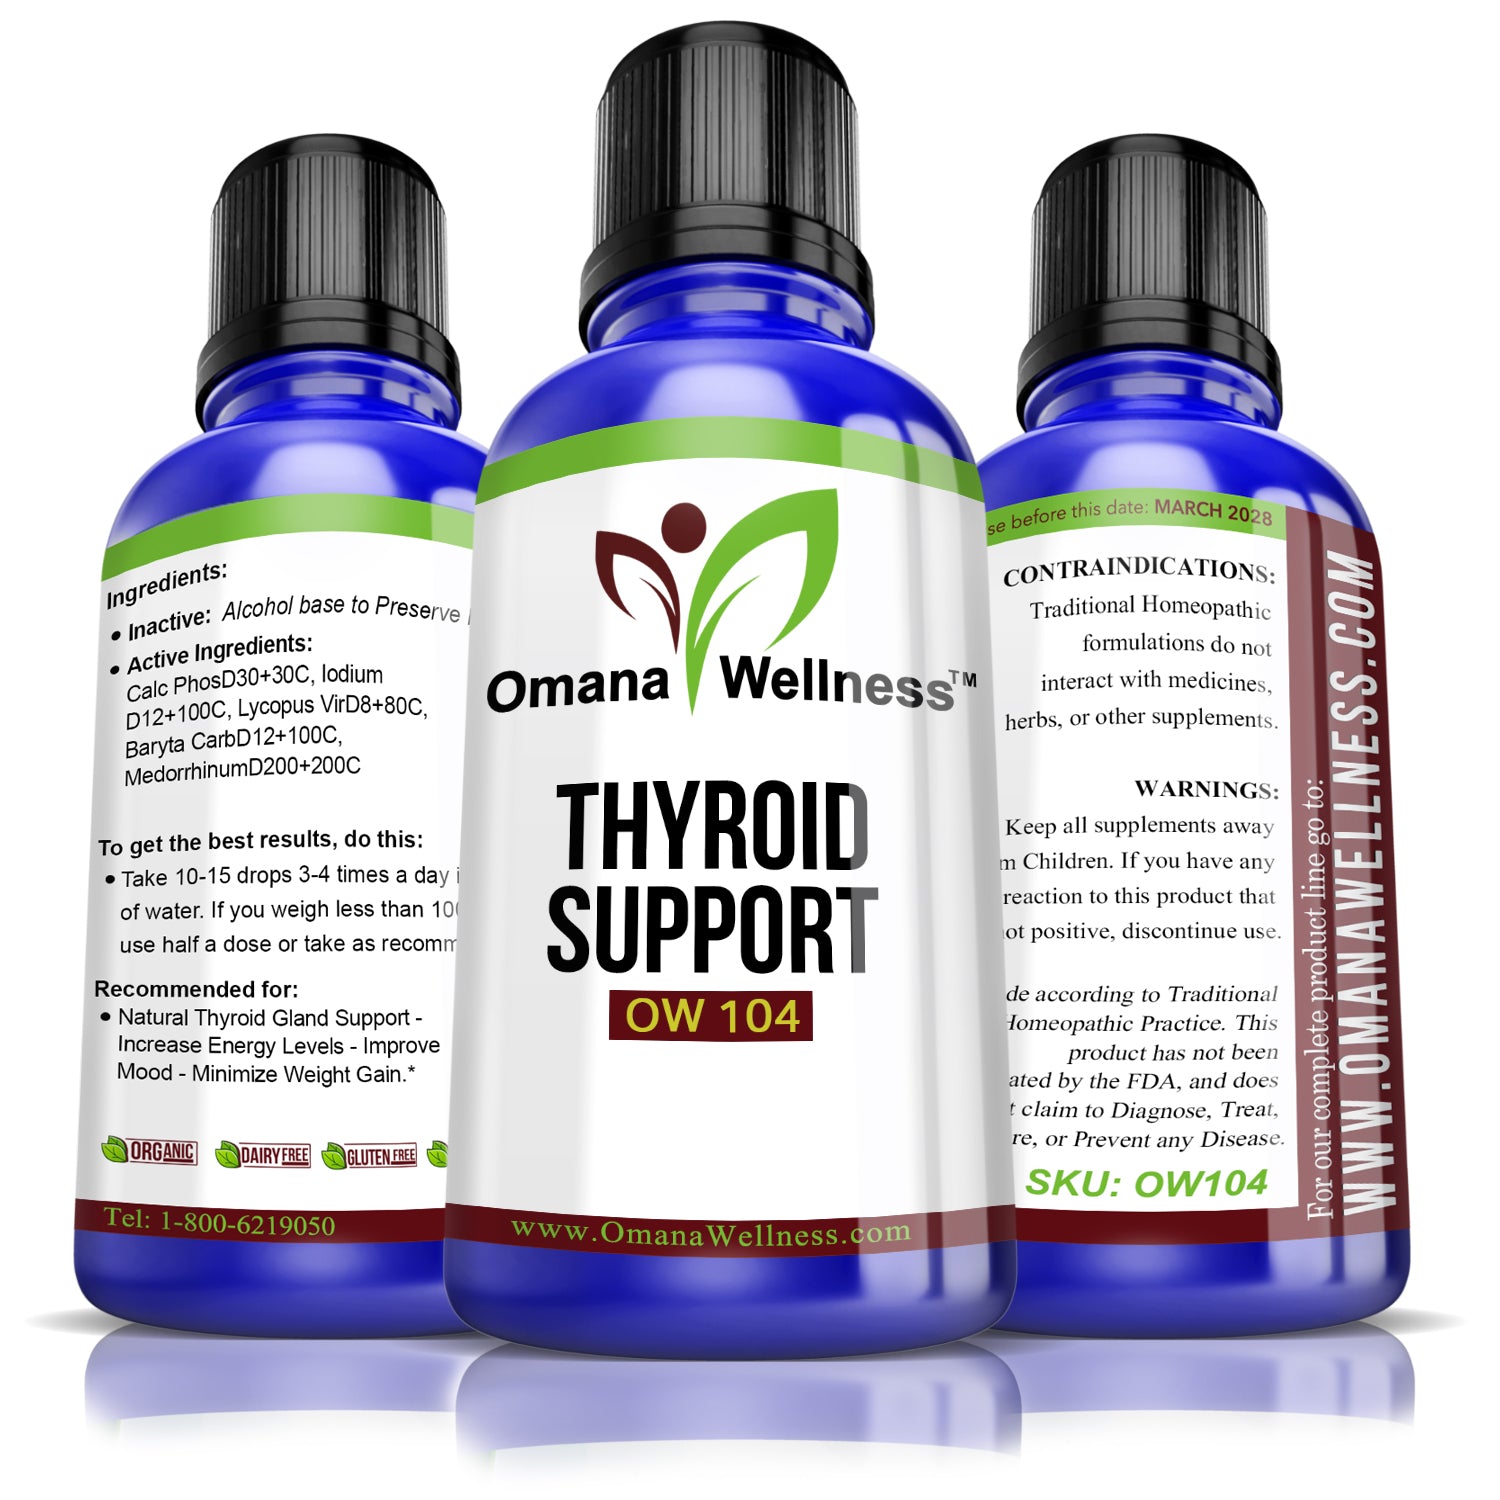 THYROID SUPPORT OW104